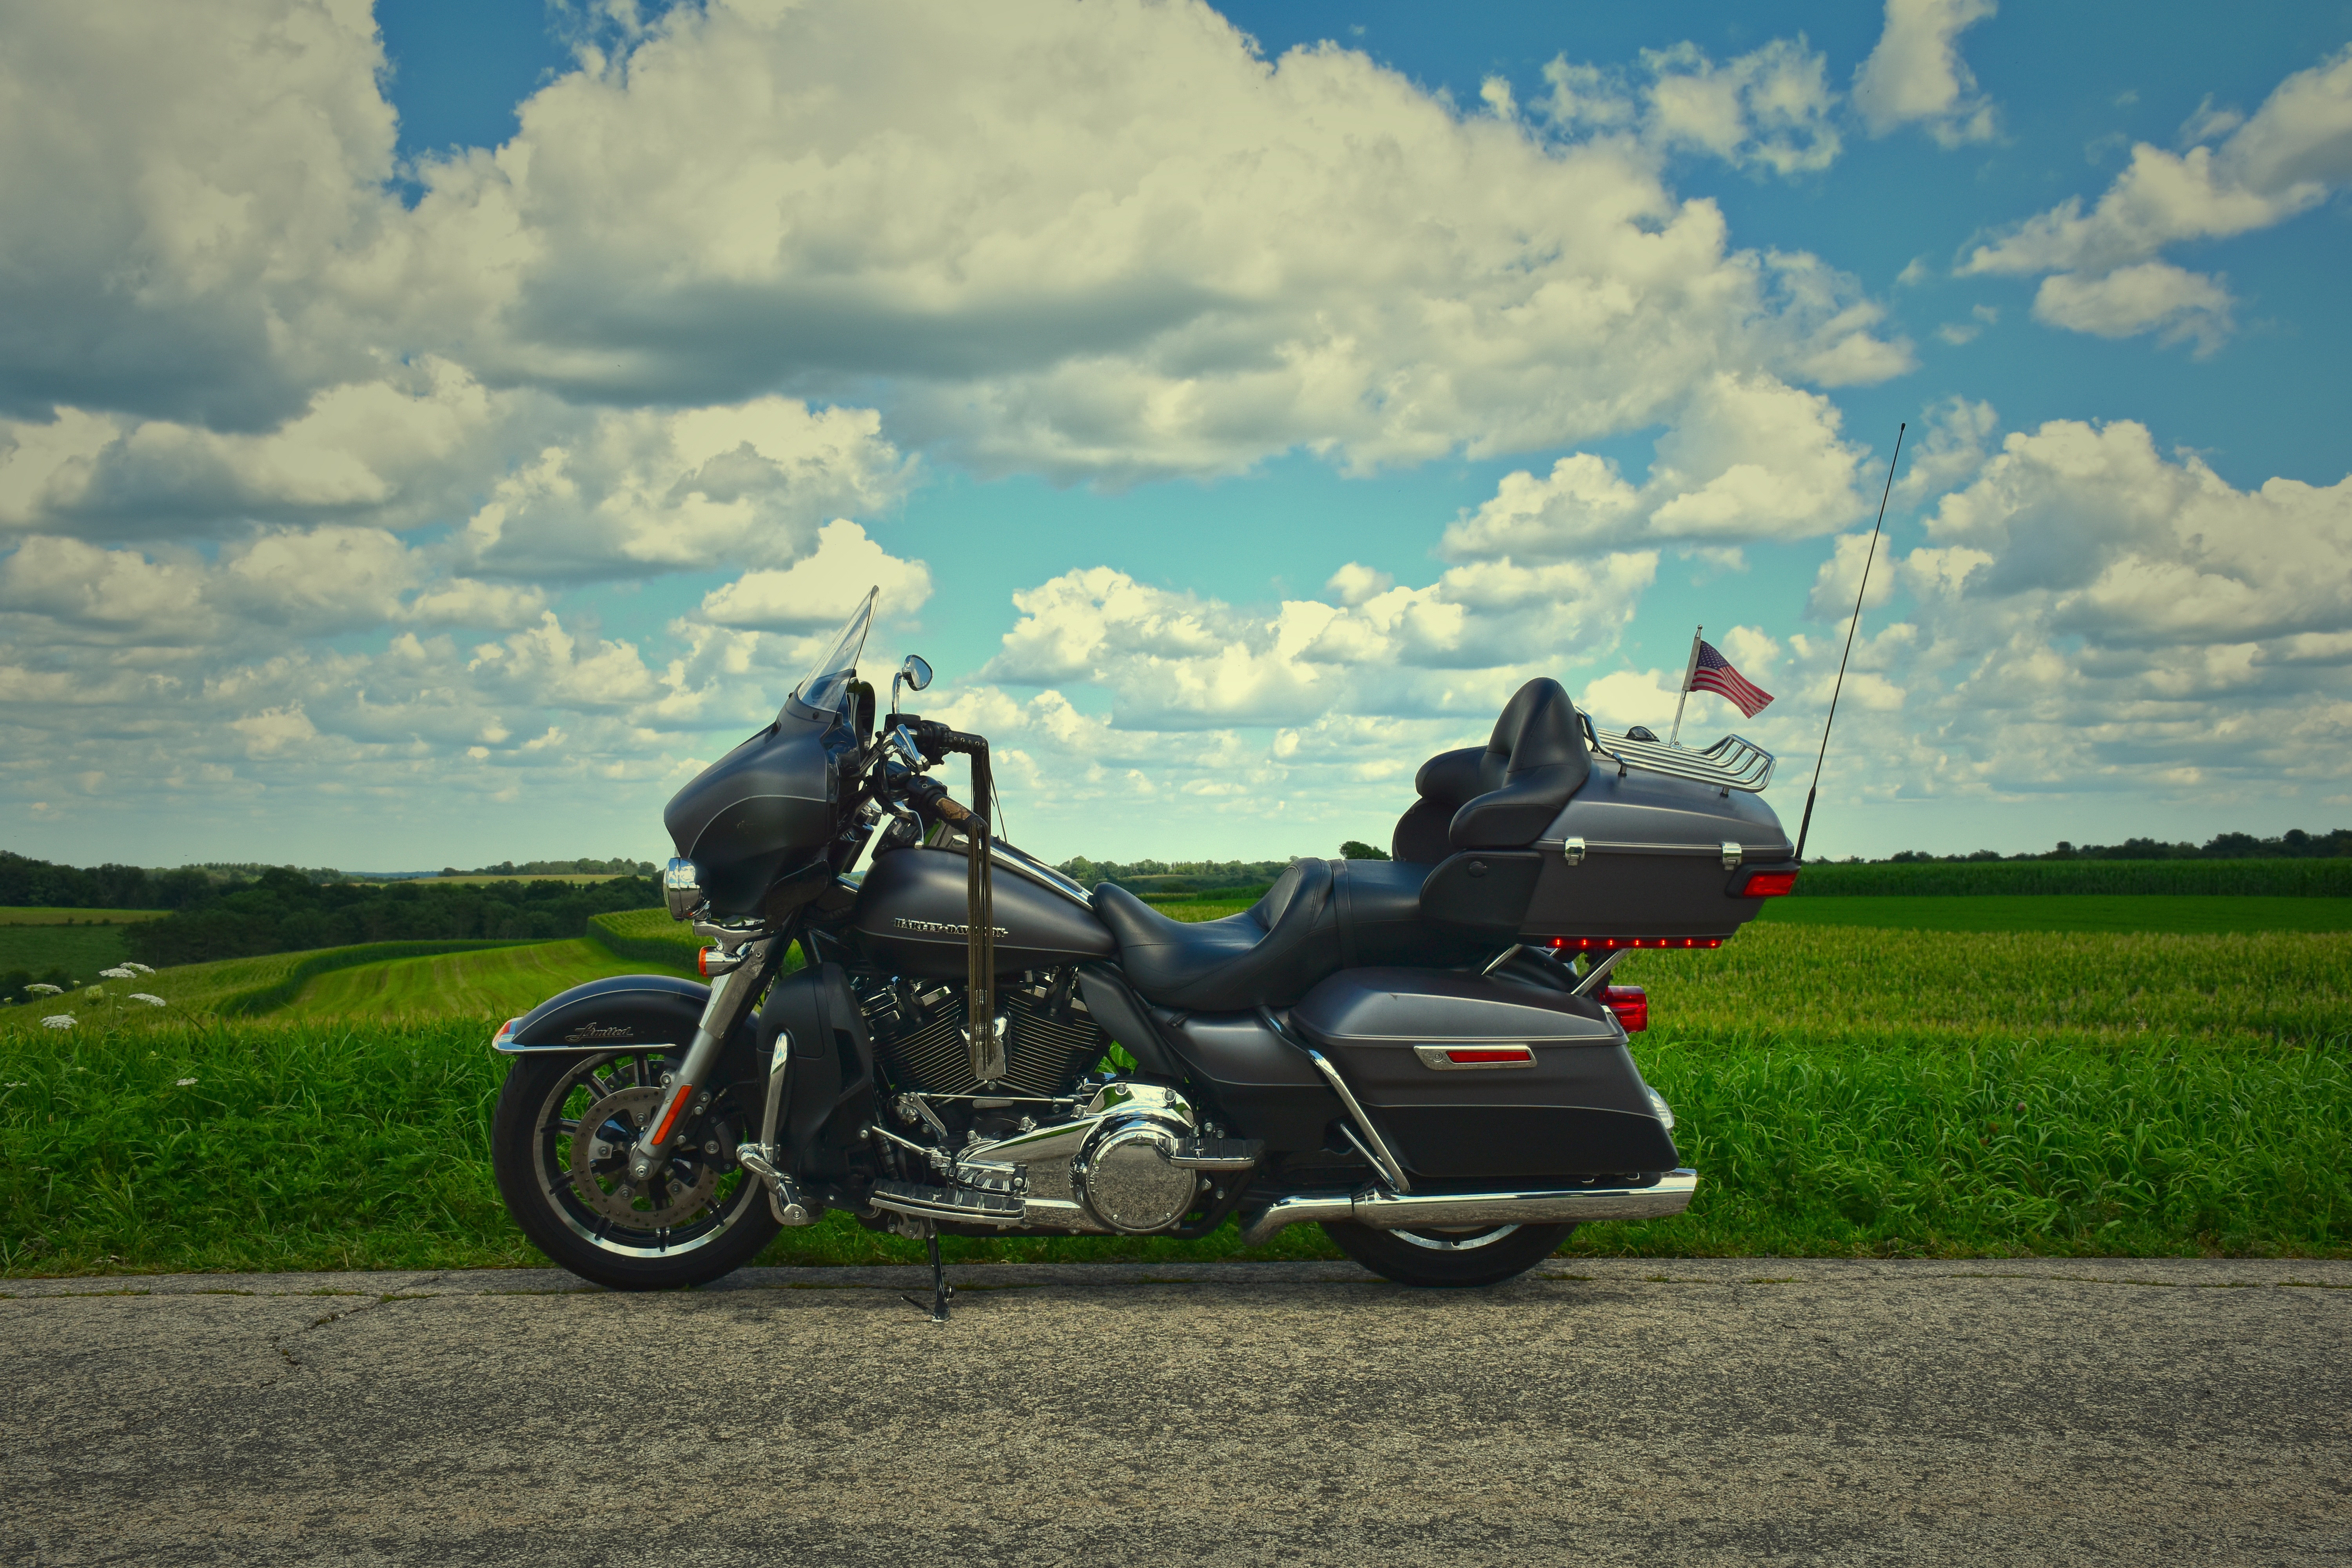 HD photos journey, motorcycles, clouds, bike